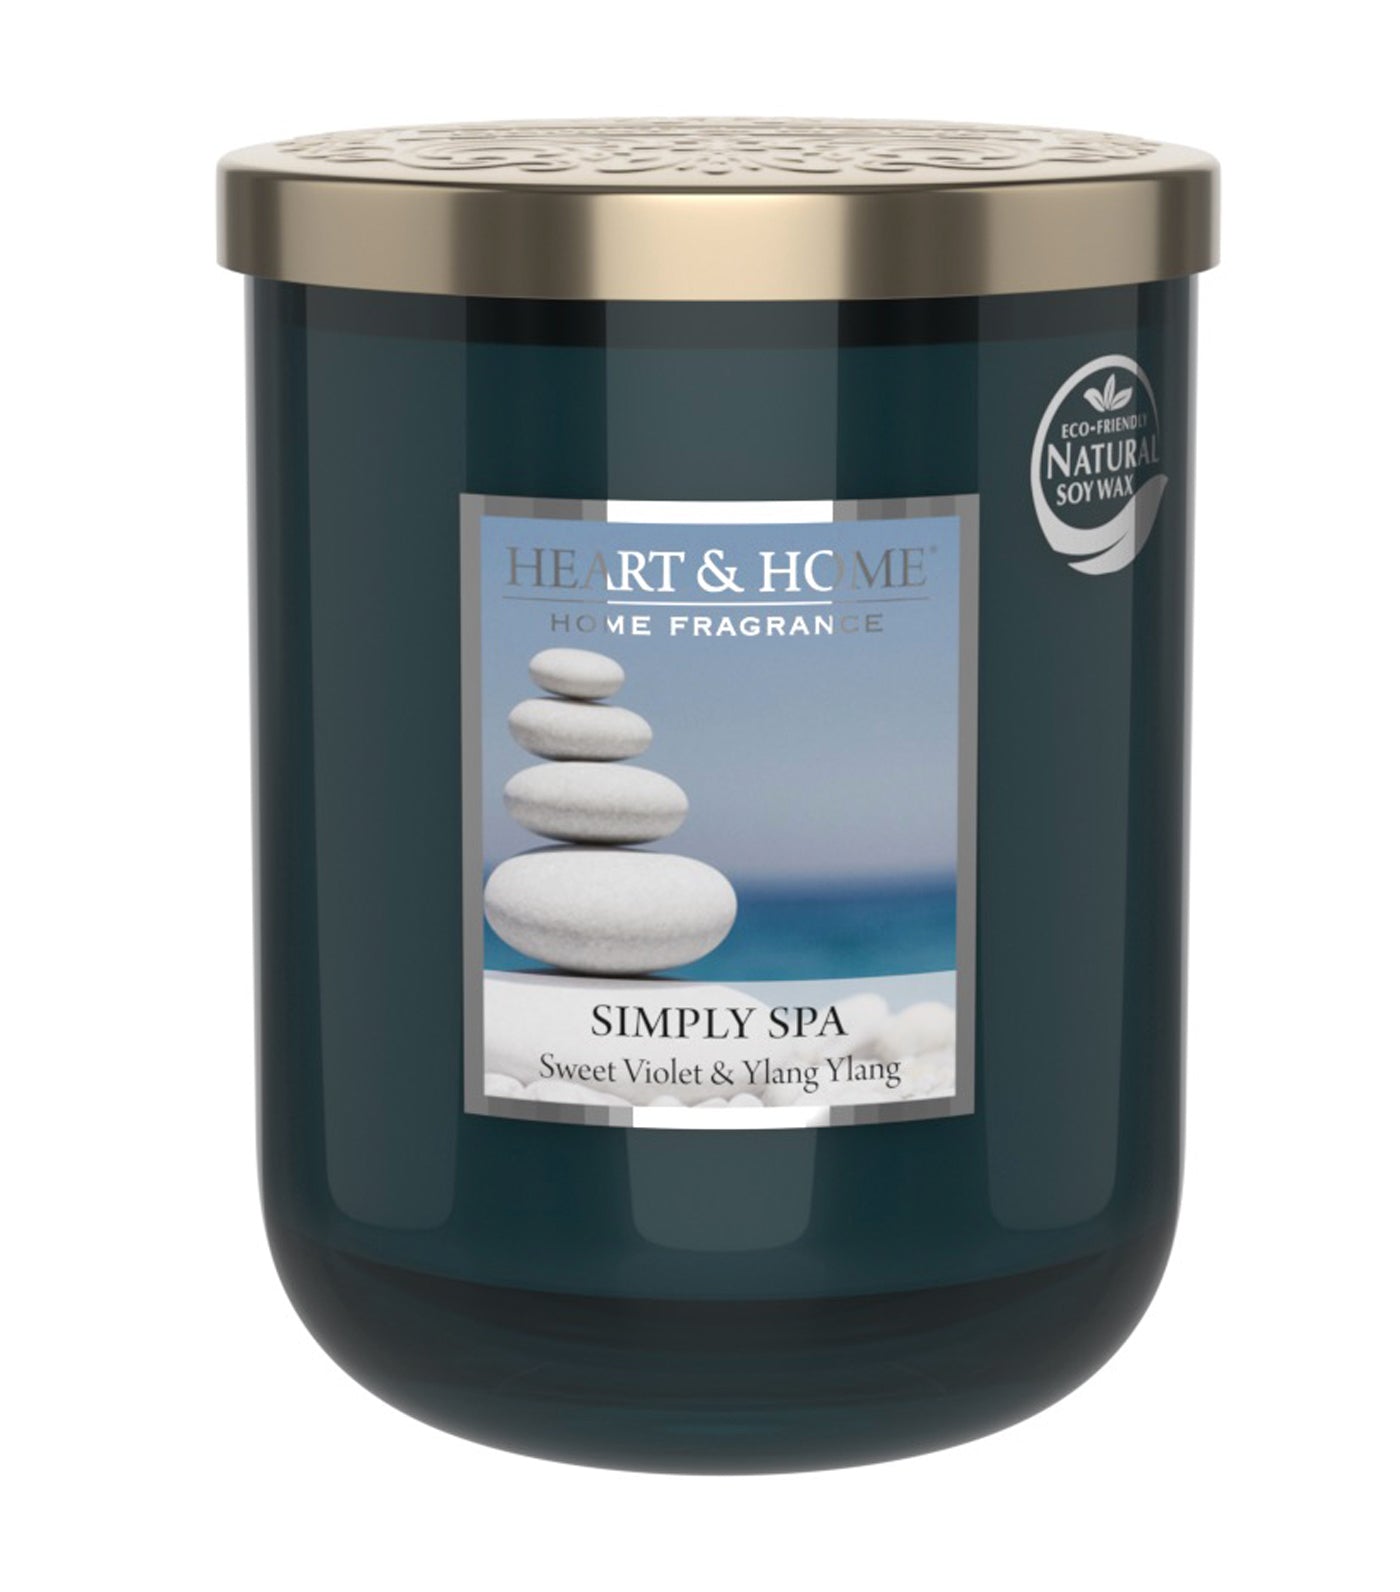 heart & home simply spa - large soy wax candle